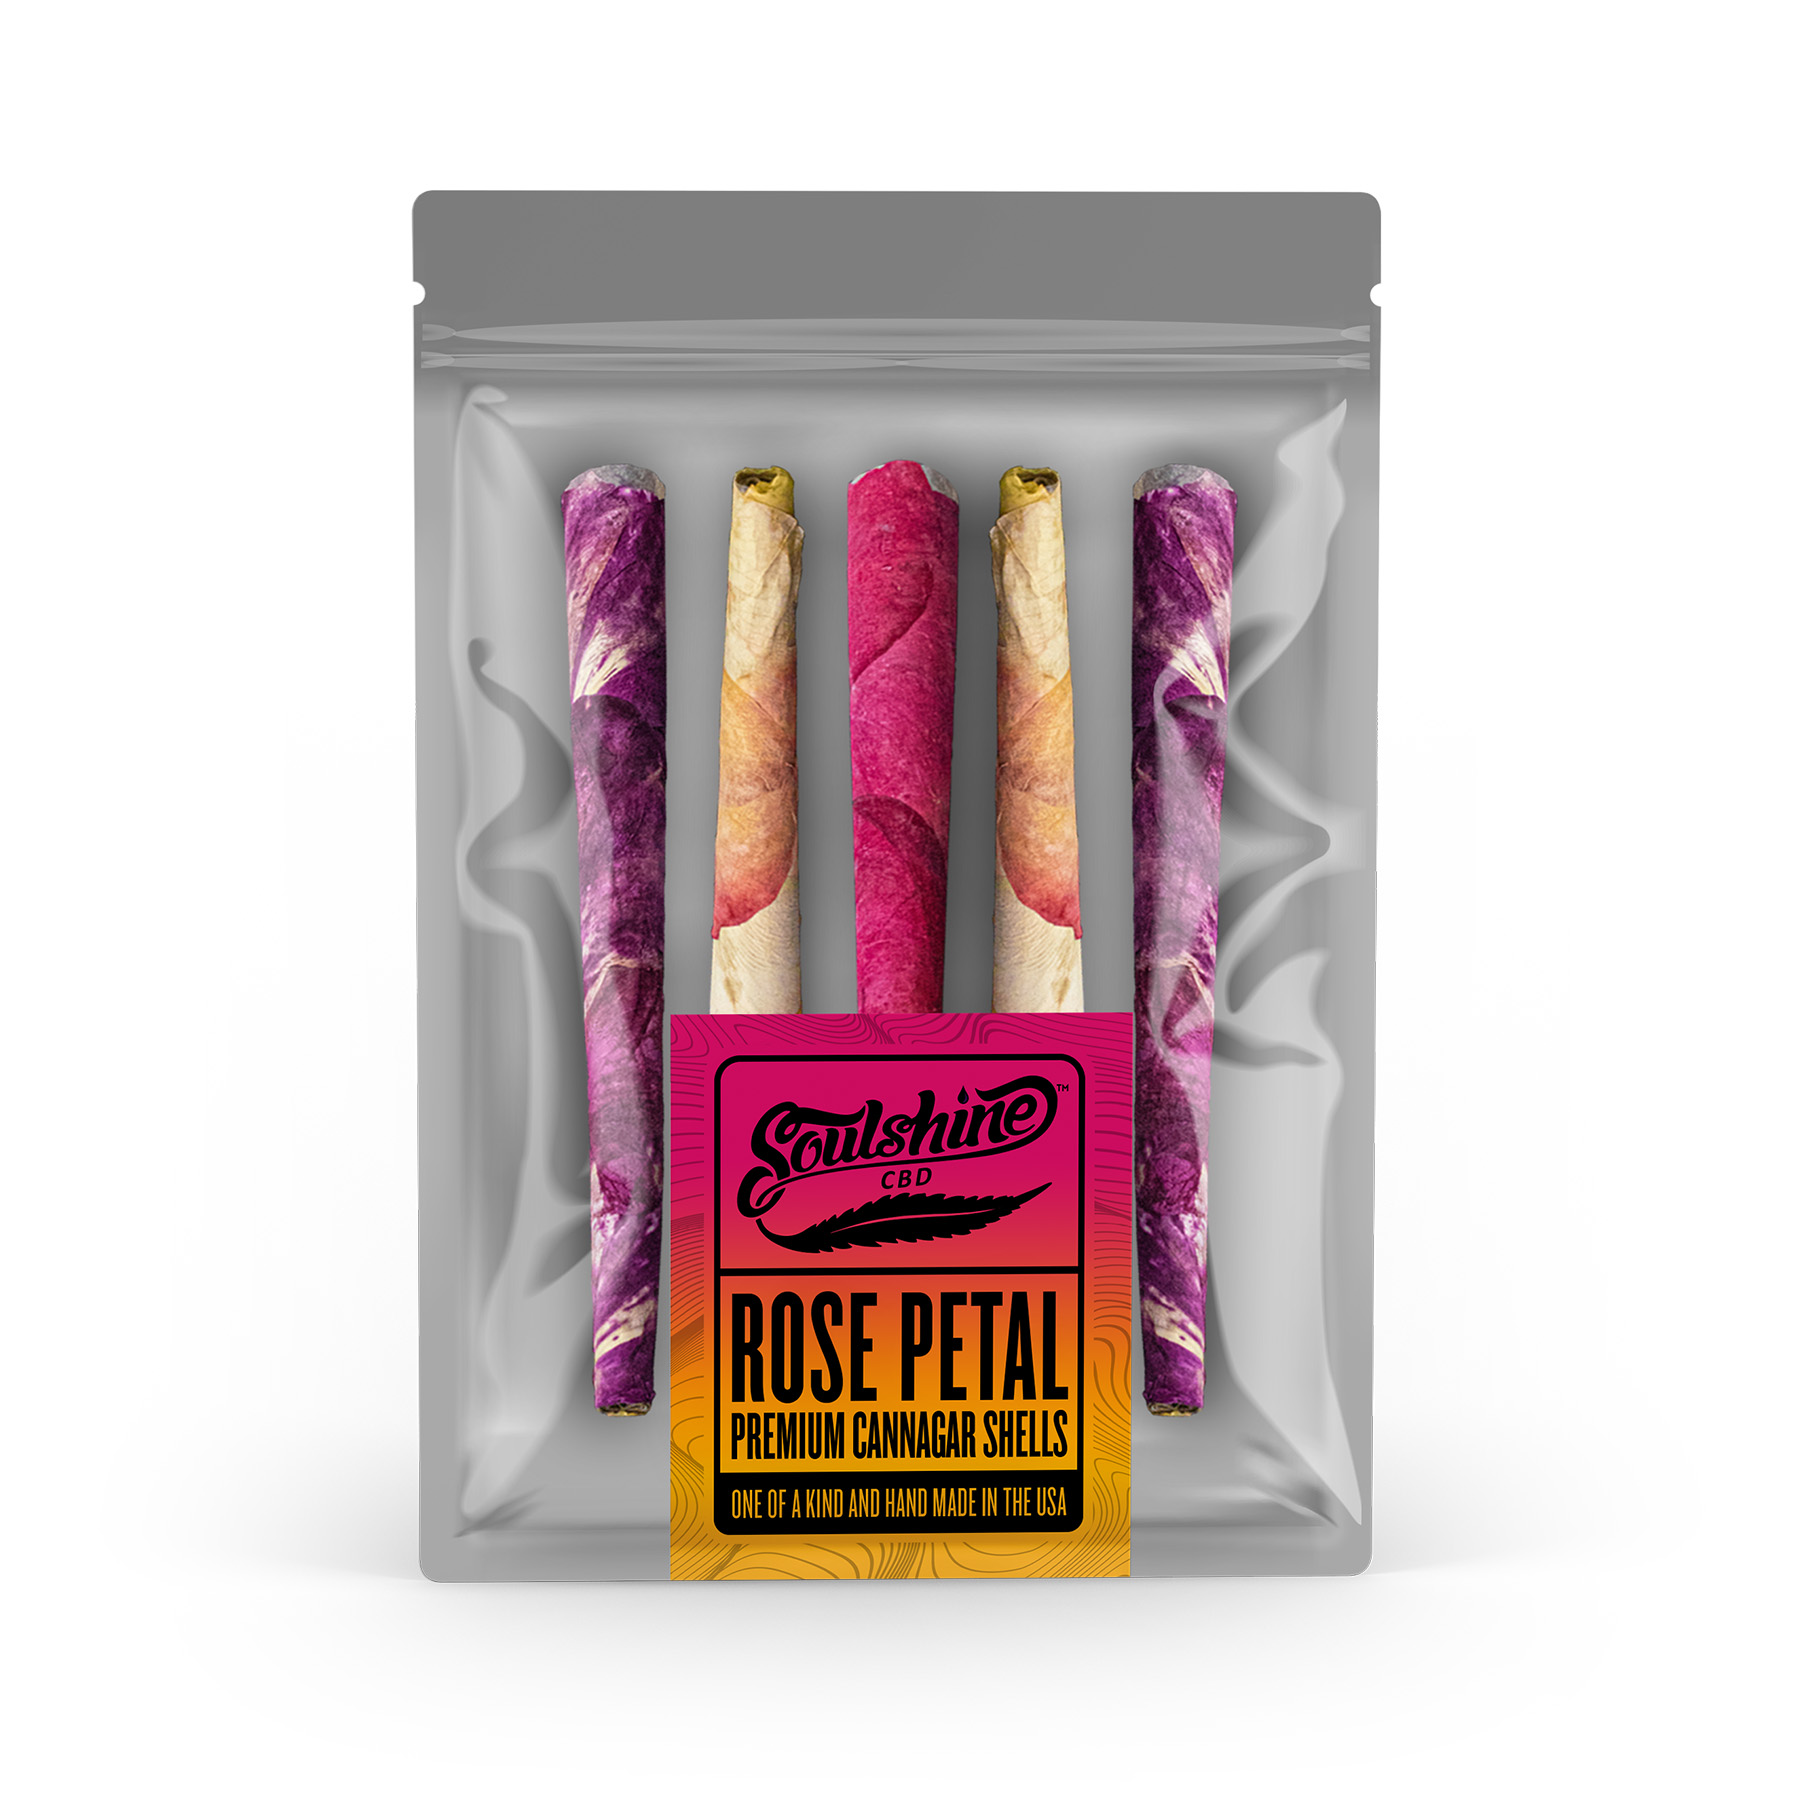 High Times - Rose petal joints! 🌹💨